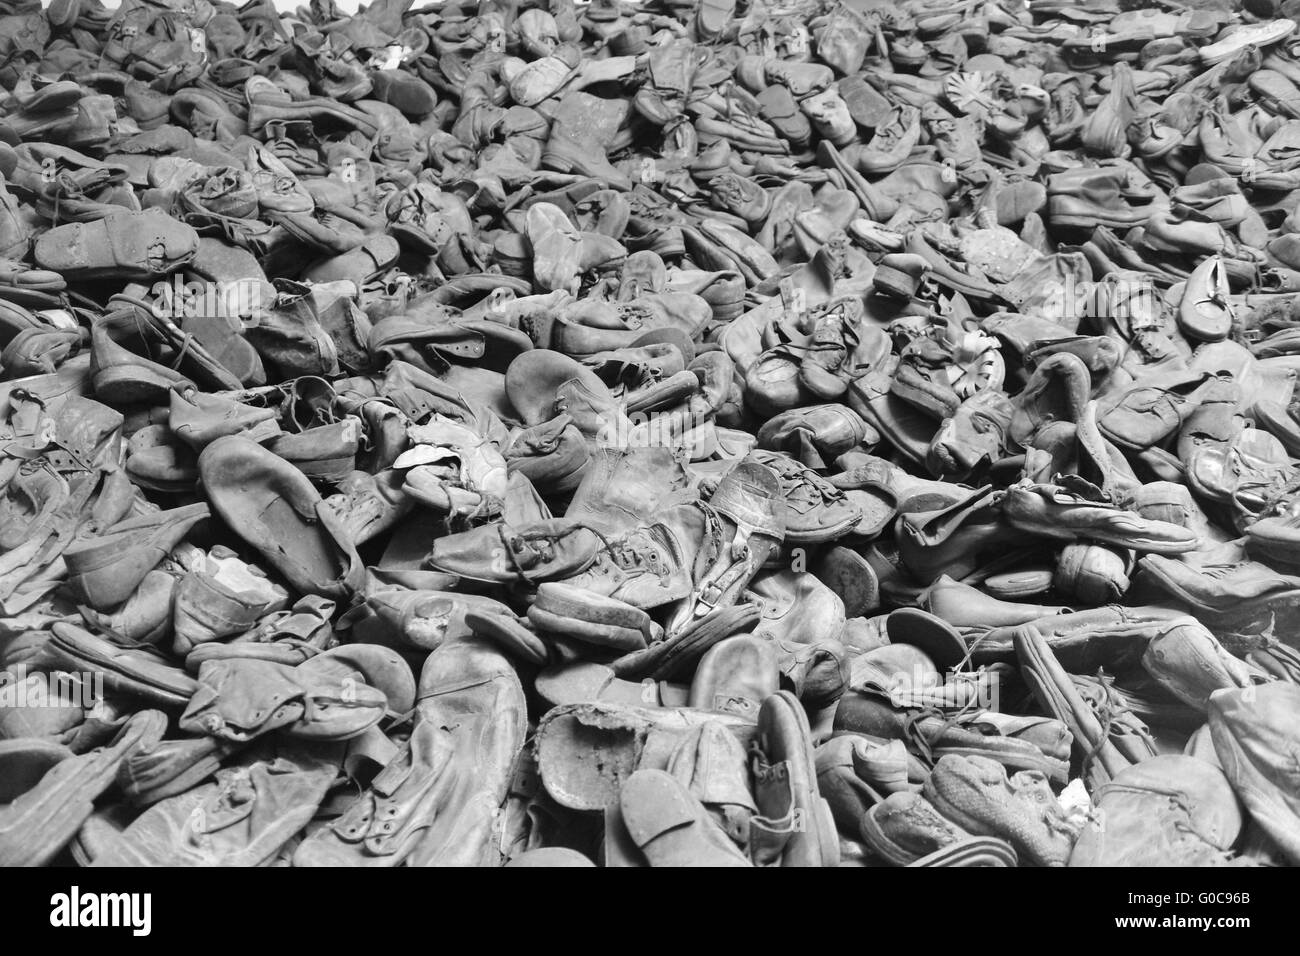 Shoes of the people deported in Auschwitz concentration camp Stock Photo